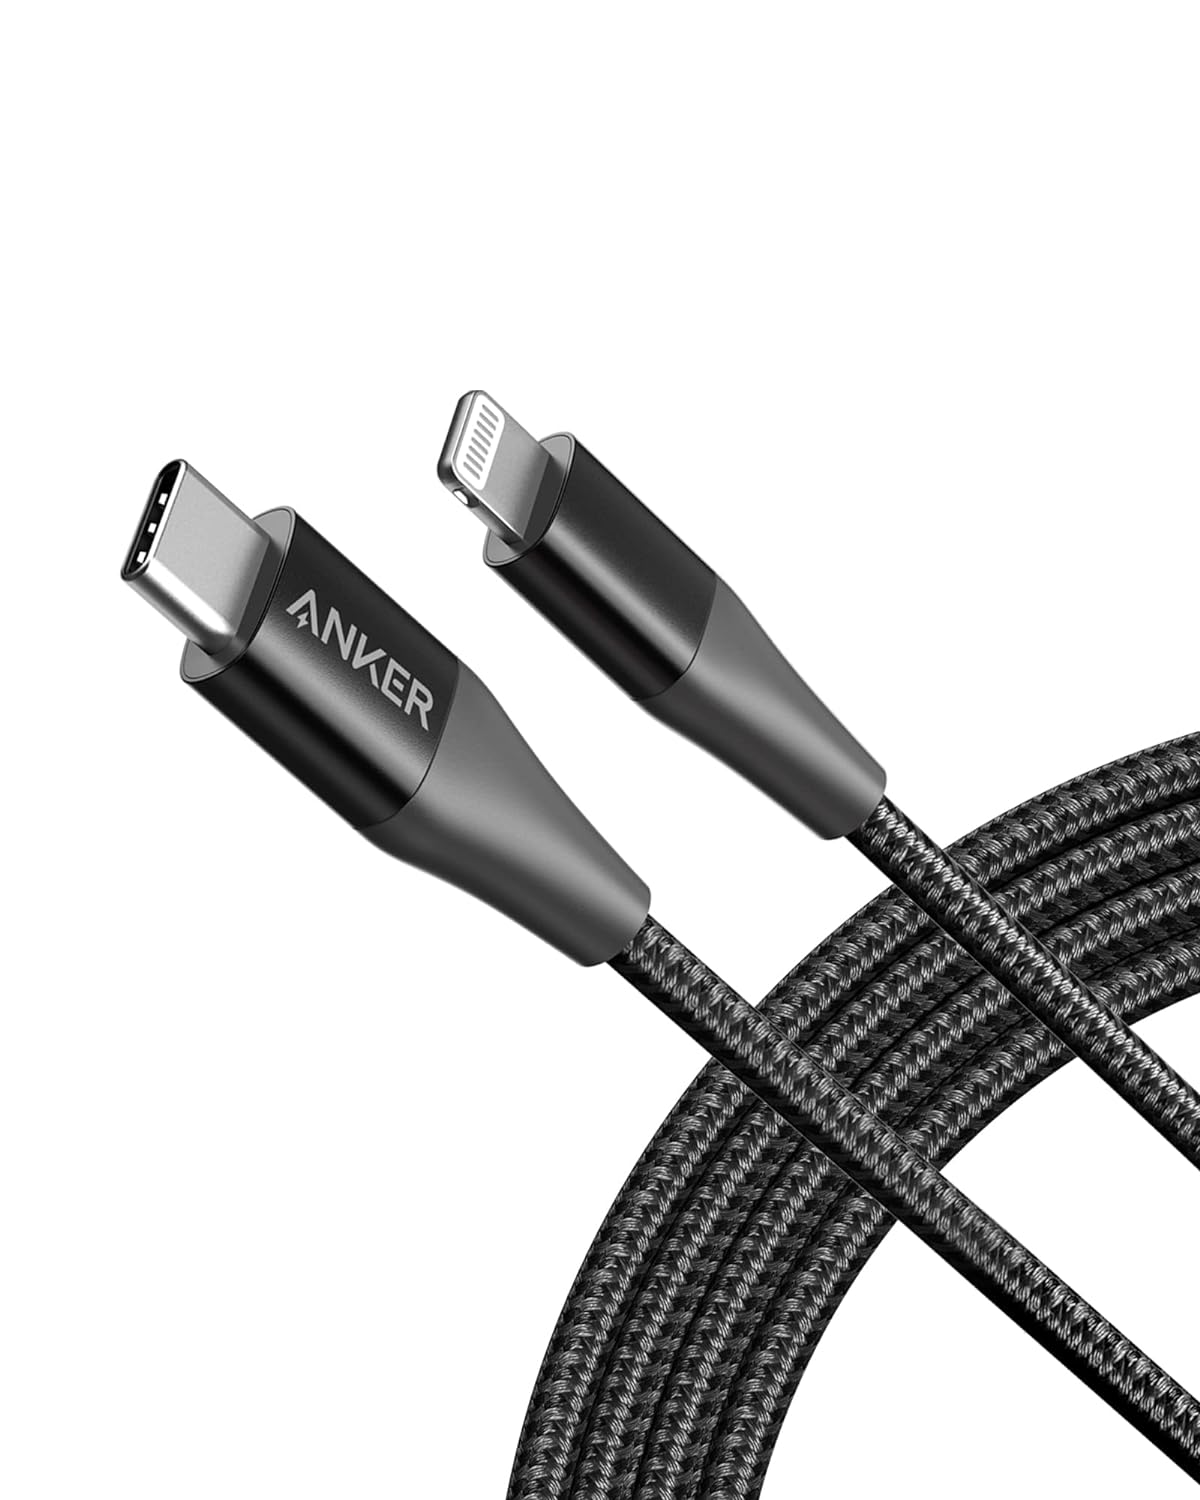 Anker PowerLine+ II USB-C to Lightning Cable (6ft)